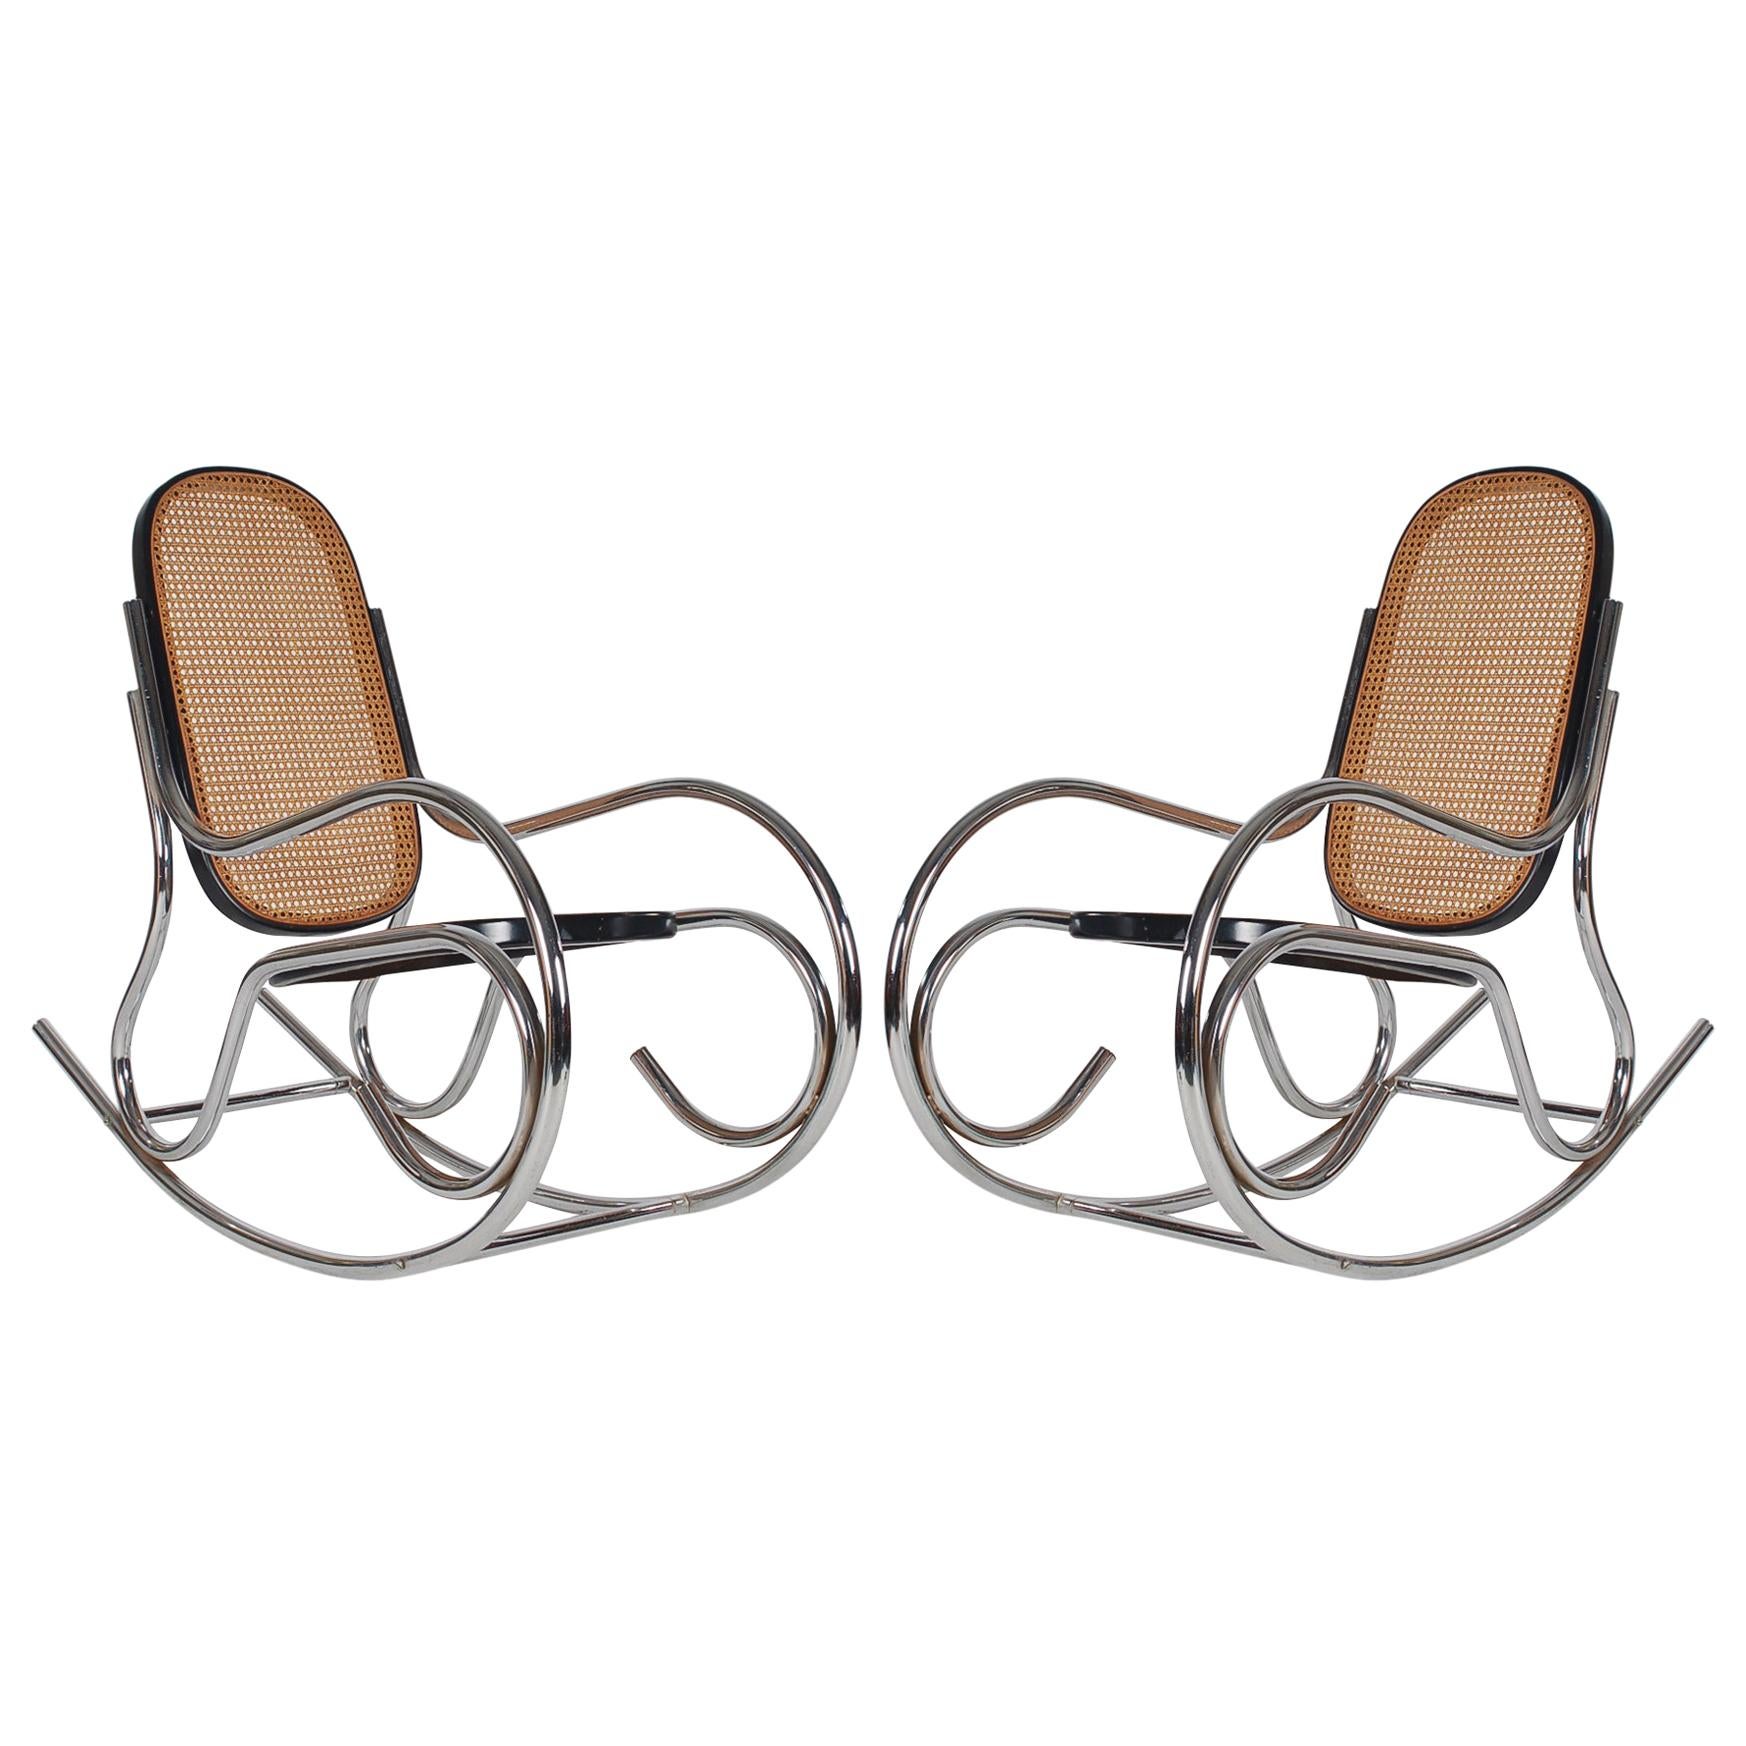 Midcentury Scrolled Chrome and Cane Rocking Chair in the Manner of Marcel Breuer For Sale